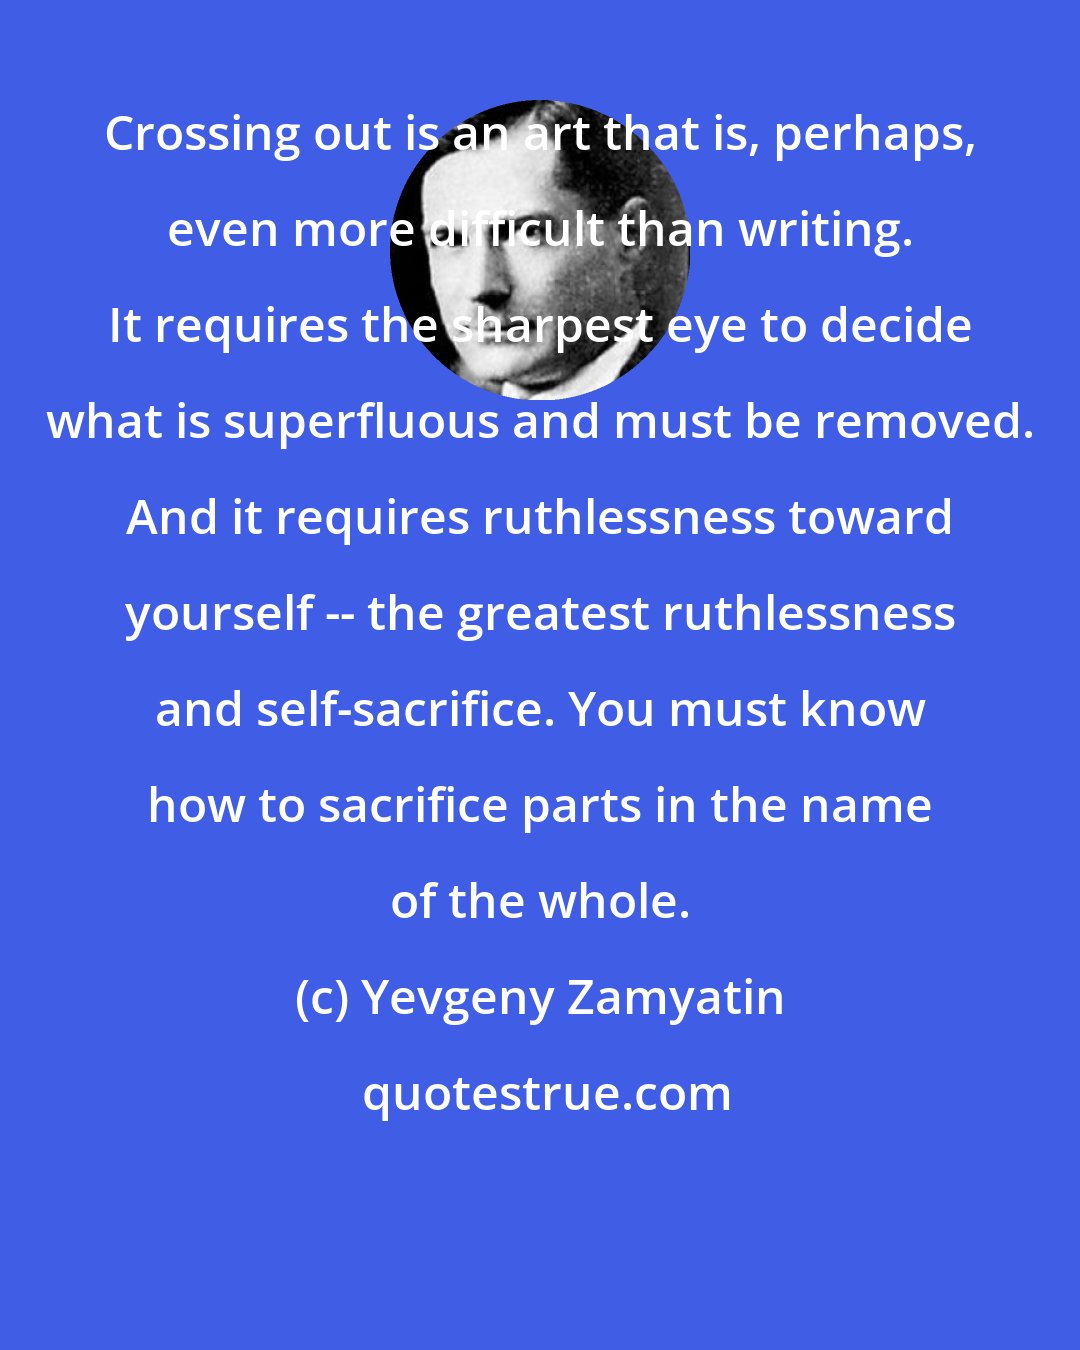 Yevgeny Zamyatin: Crossing out is an art that is, perhaps, even more difficult than writing. It requires the sharpest eye to decide what is superfluous and must be removed. And it requires ruthlessness toward yourself -- the greatest ruthlessness and self-sacrifice. You must know how to sacrifice parts in the name of the whole.